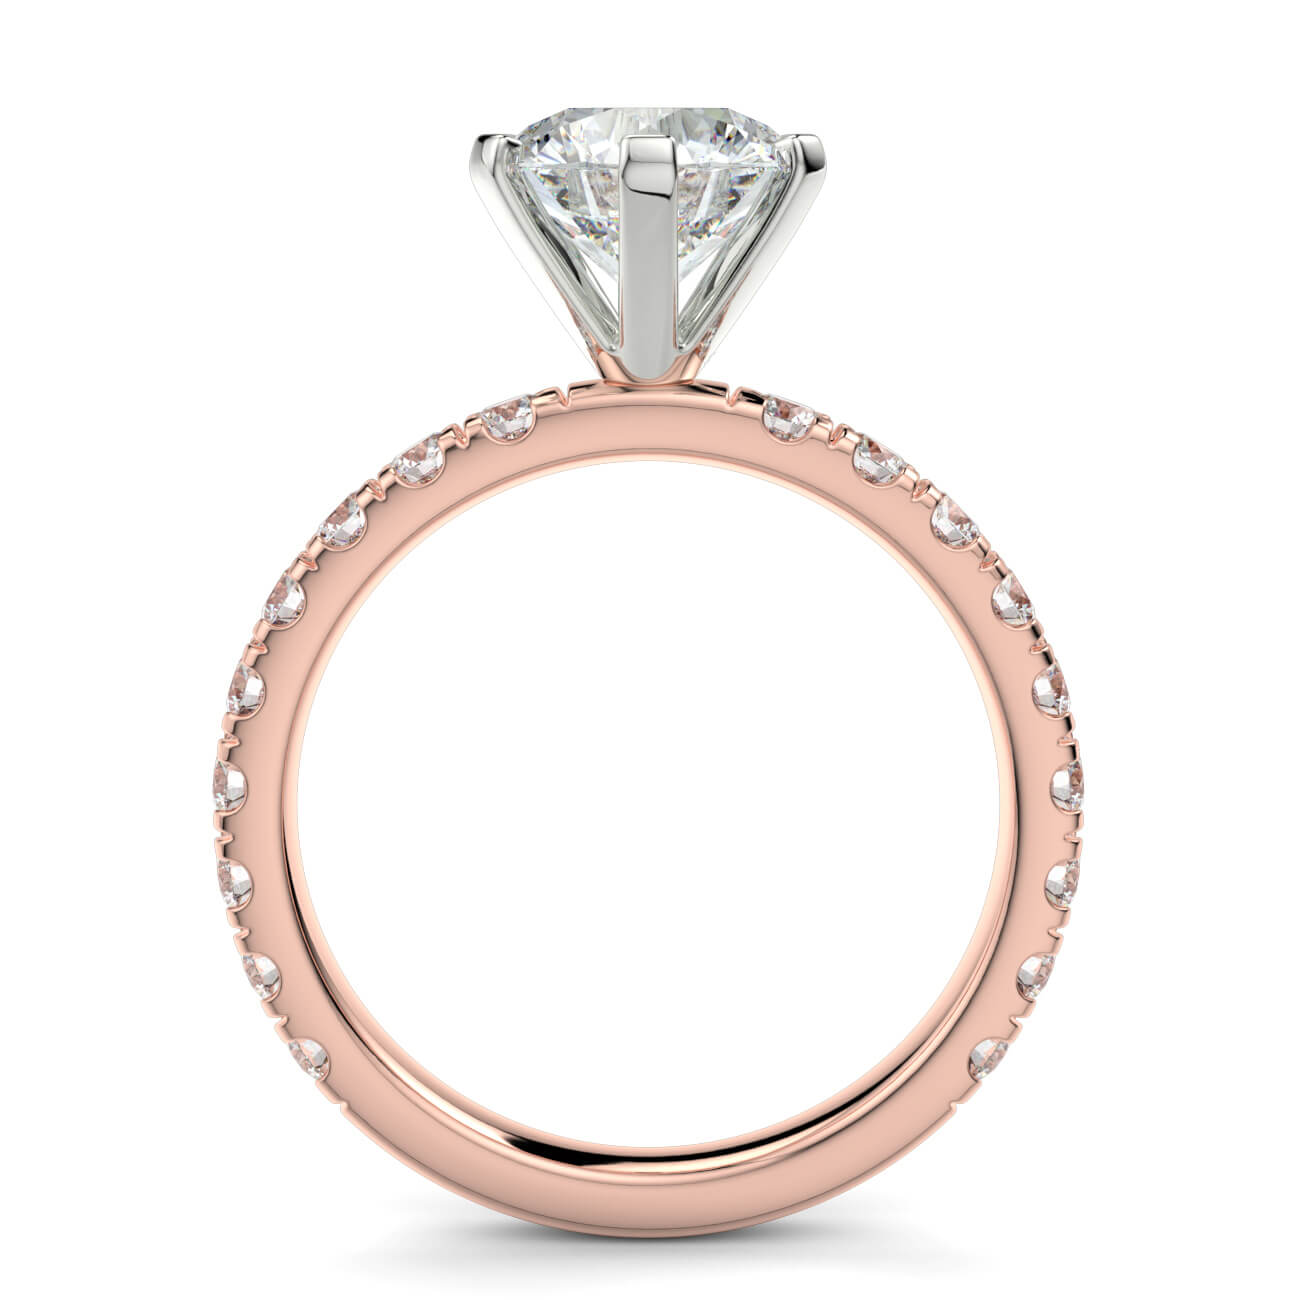 6 Claw Classic Pavé Diamond Engagement Ring in 18k Rose and White Gold – Australian Diamond Network